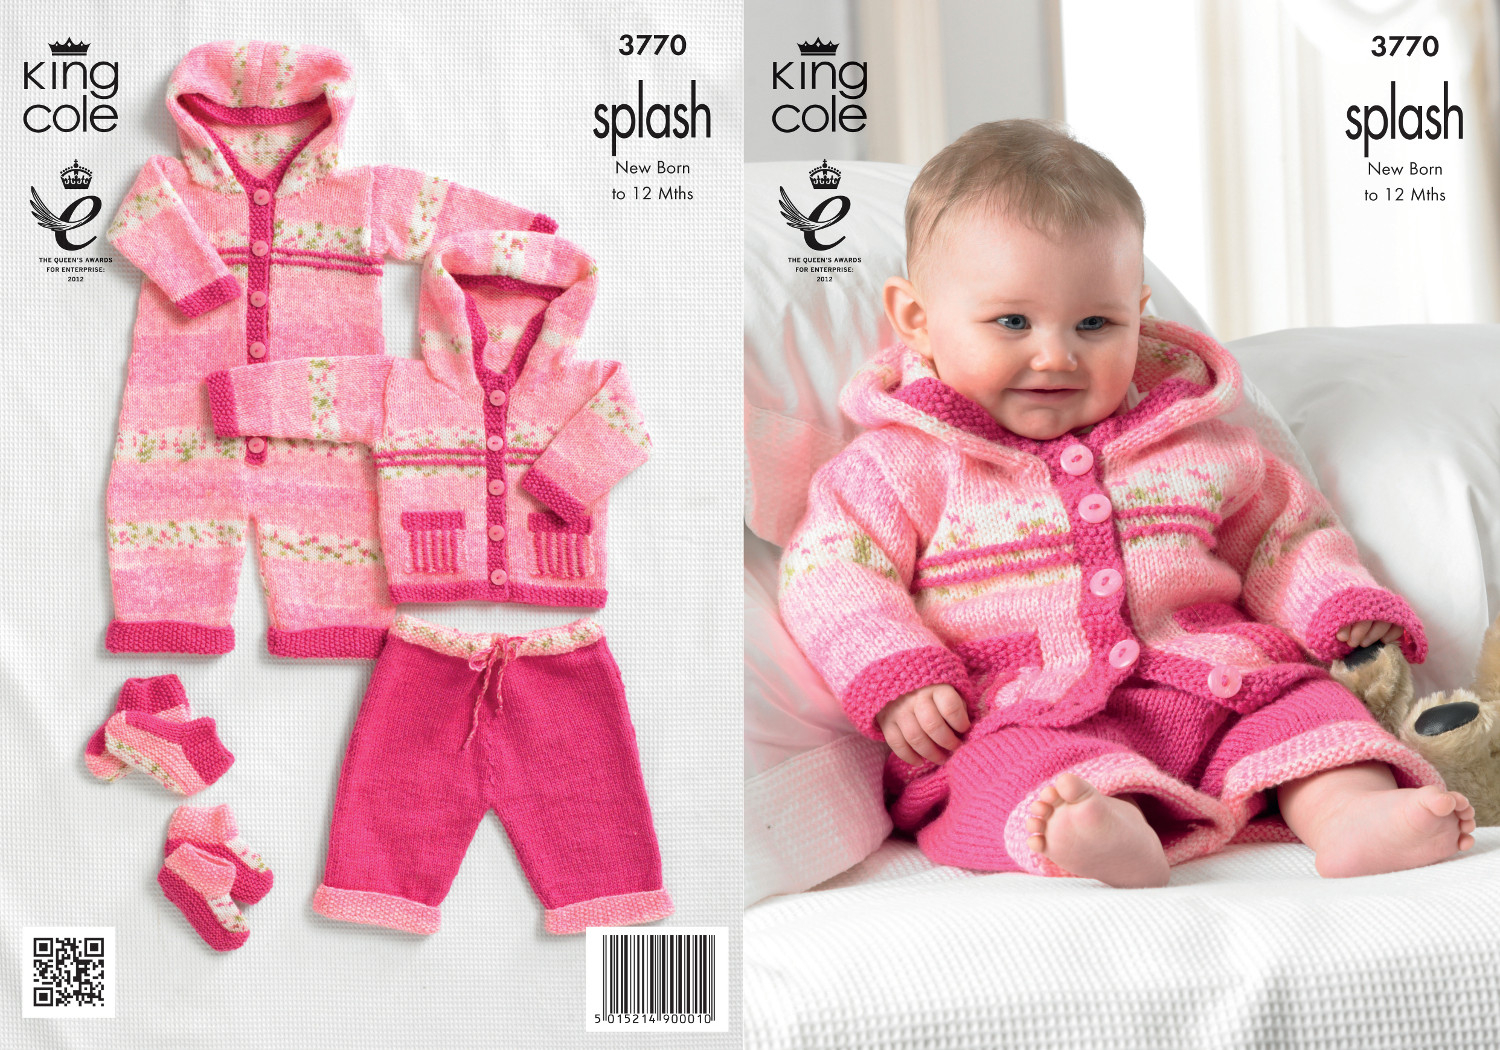 Double Knitting Patterns For Babies Free Details About Ba Double Knitting Pattern Splash Dk King Cole Coat Trousers All In One 3770